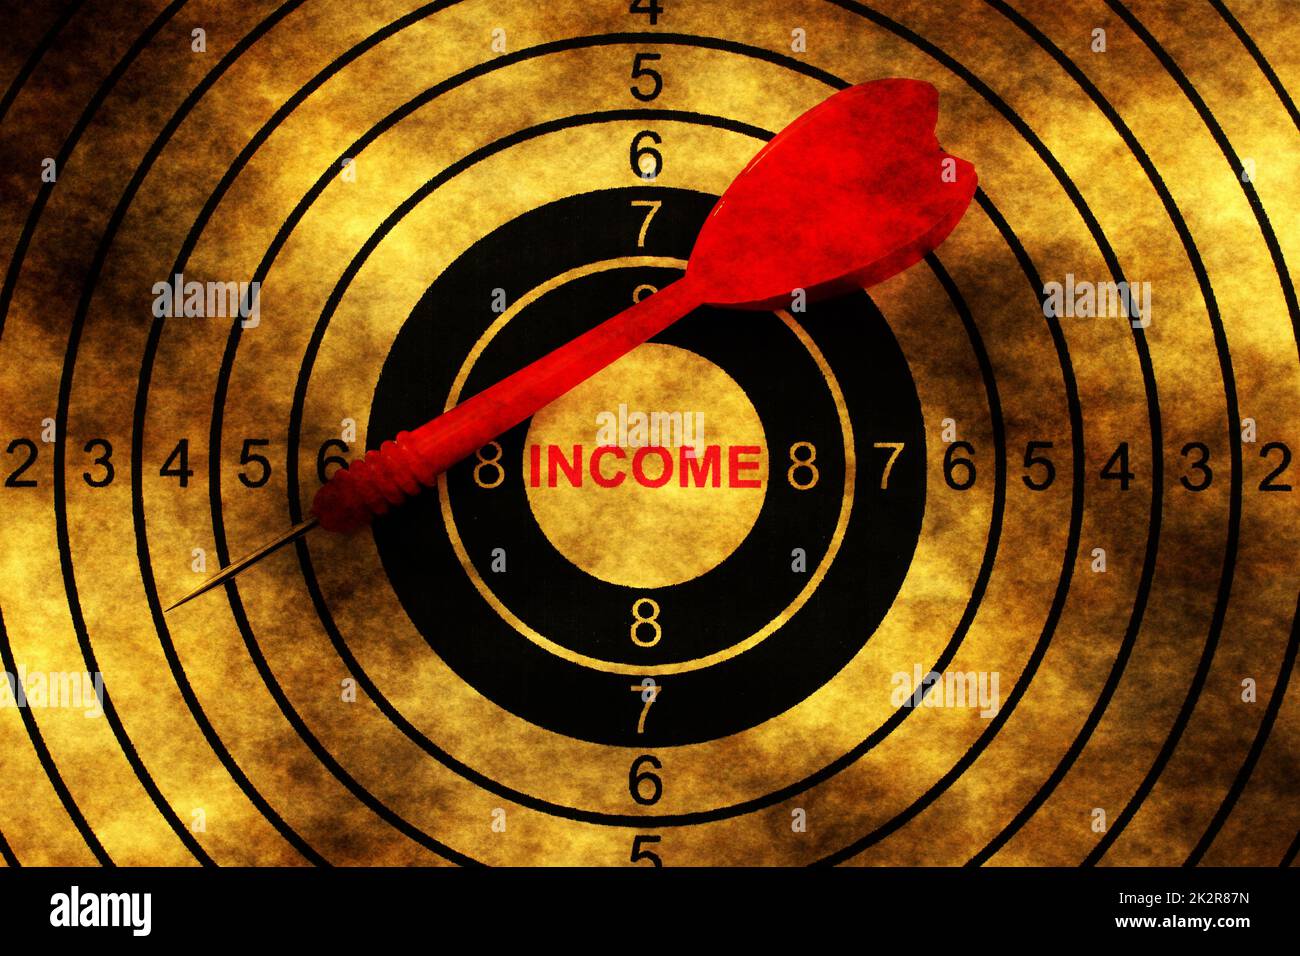 Income text on grunge  target Stock Photo